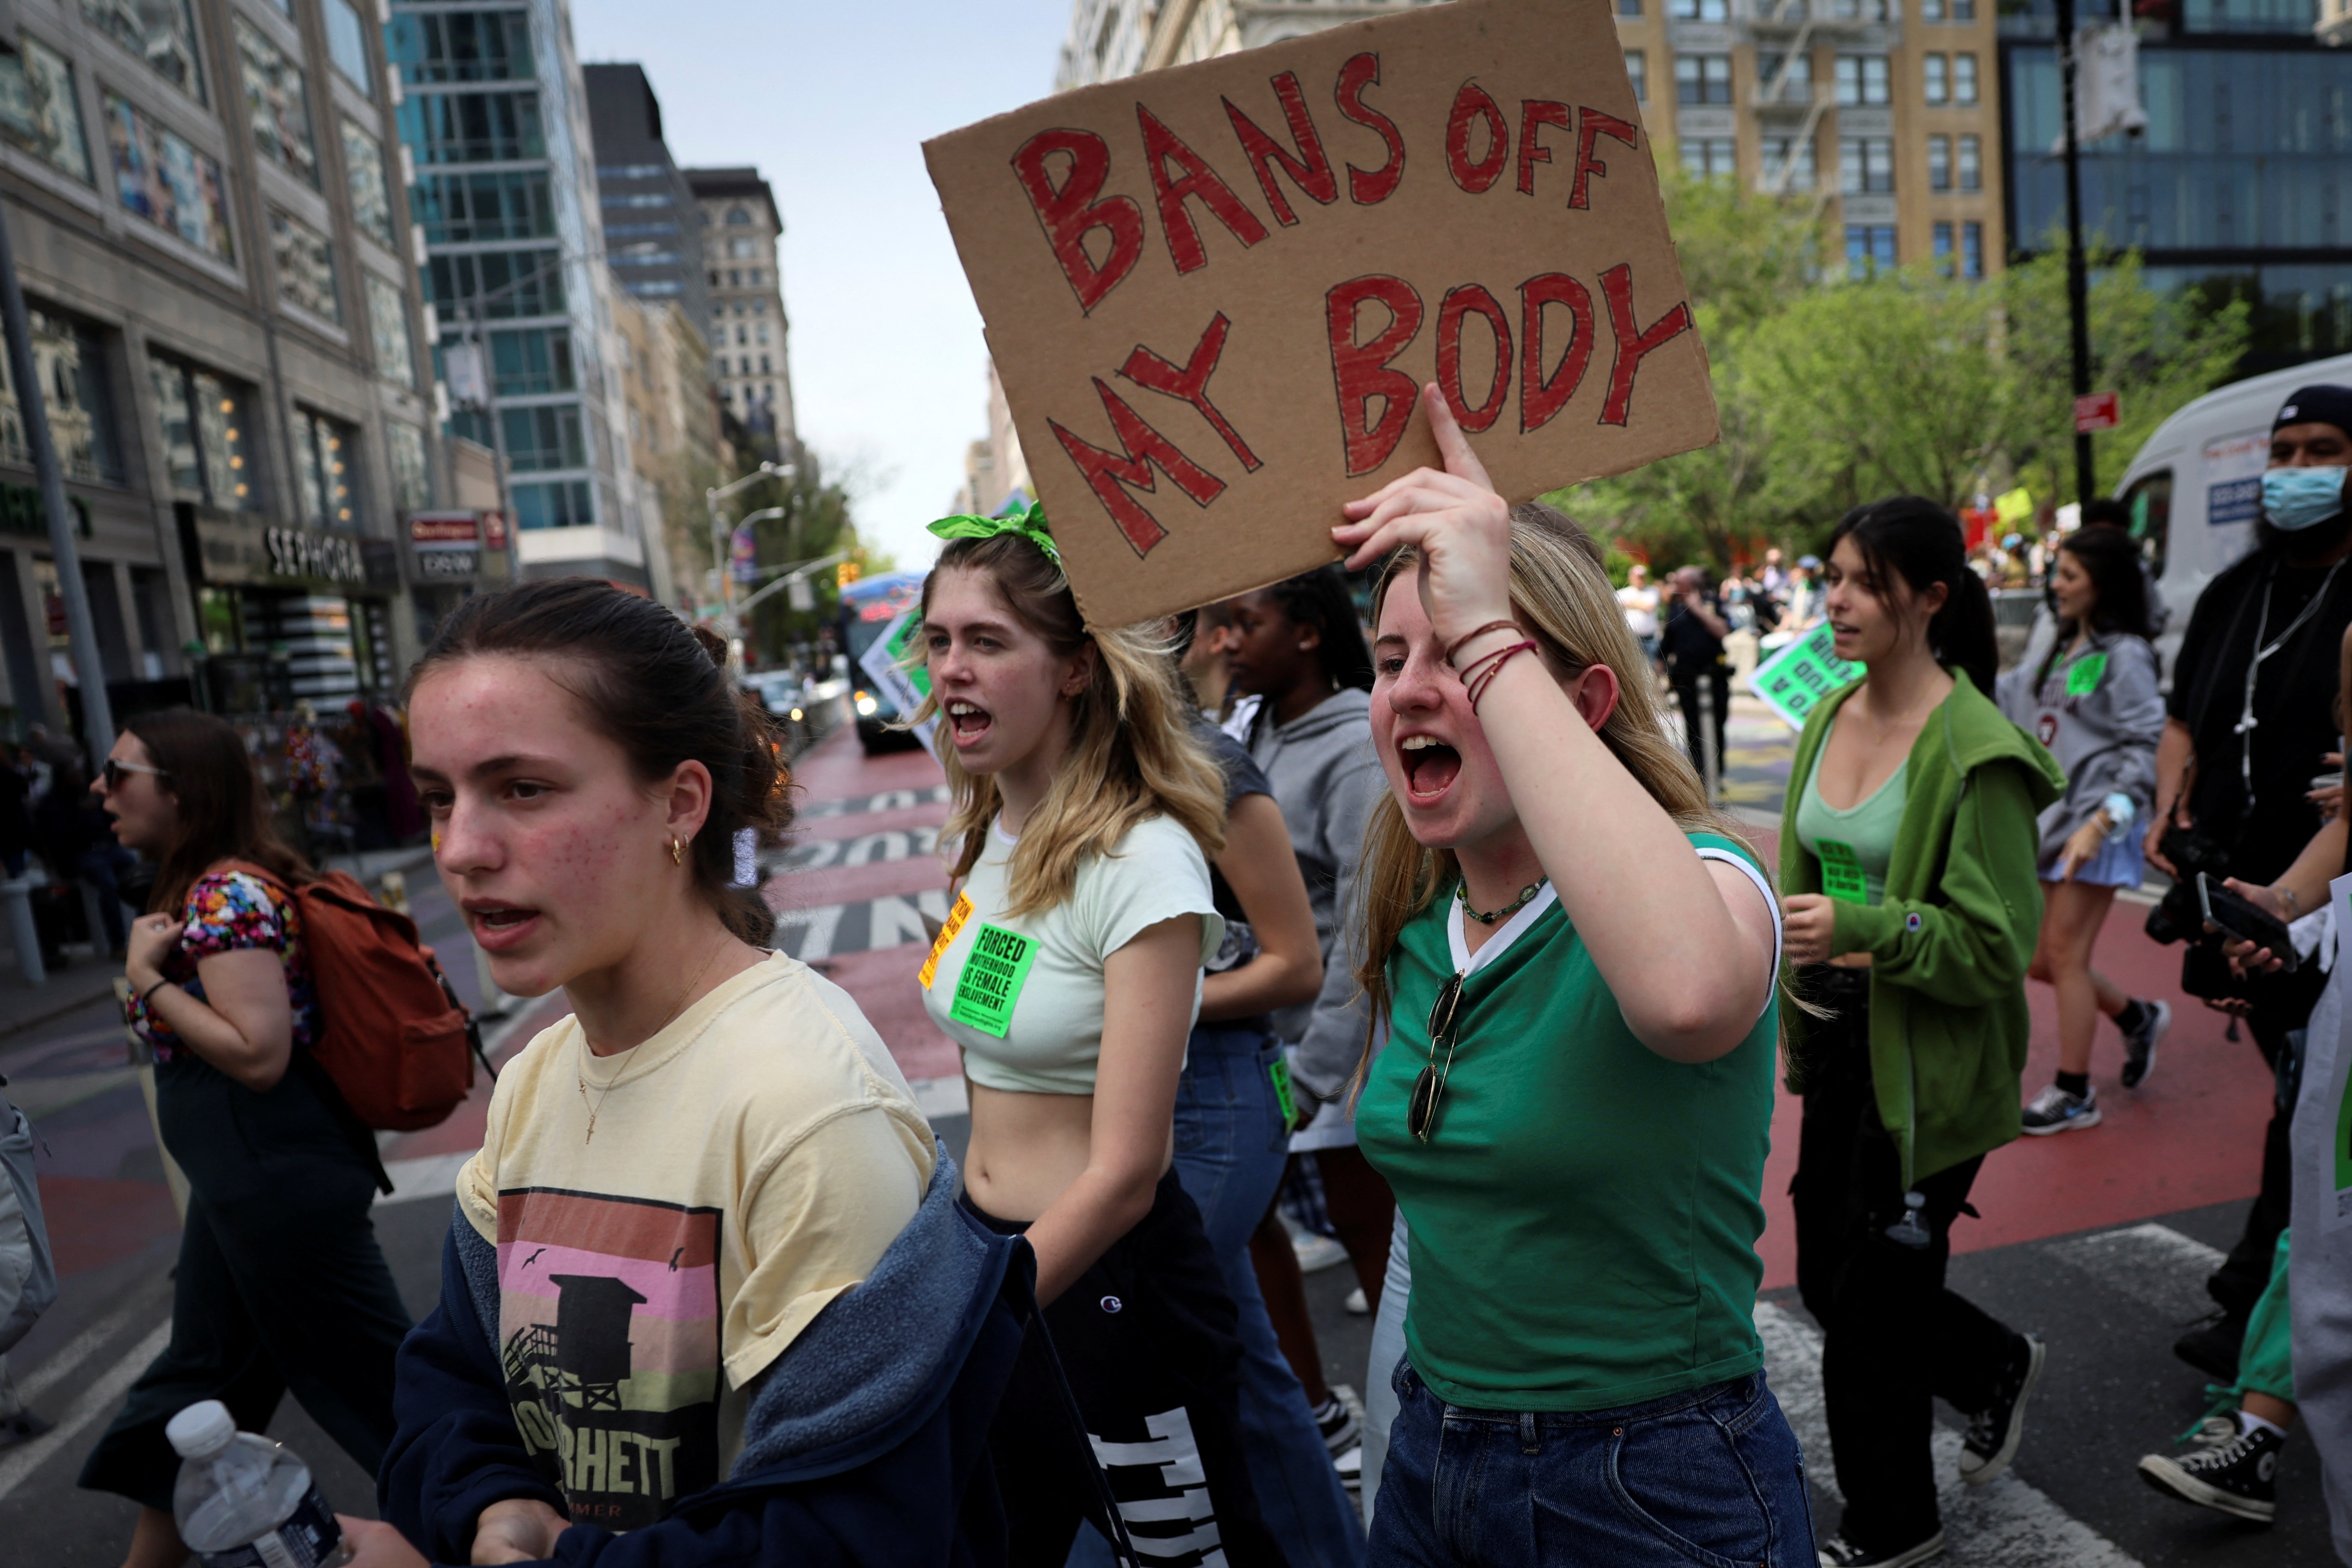 Students and others protest for abortion rights in New York City